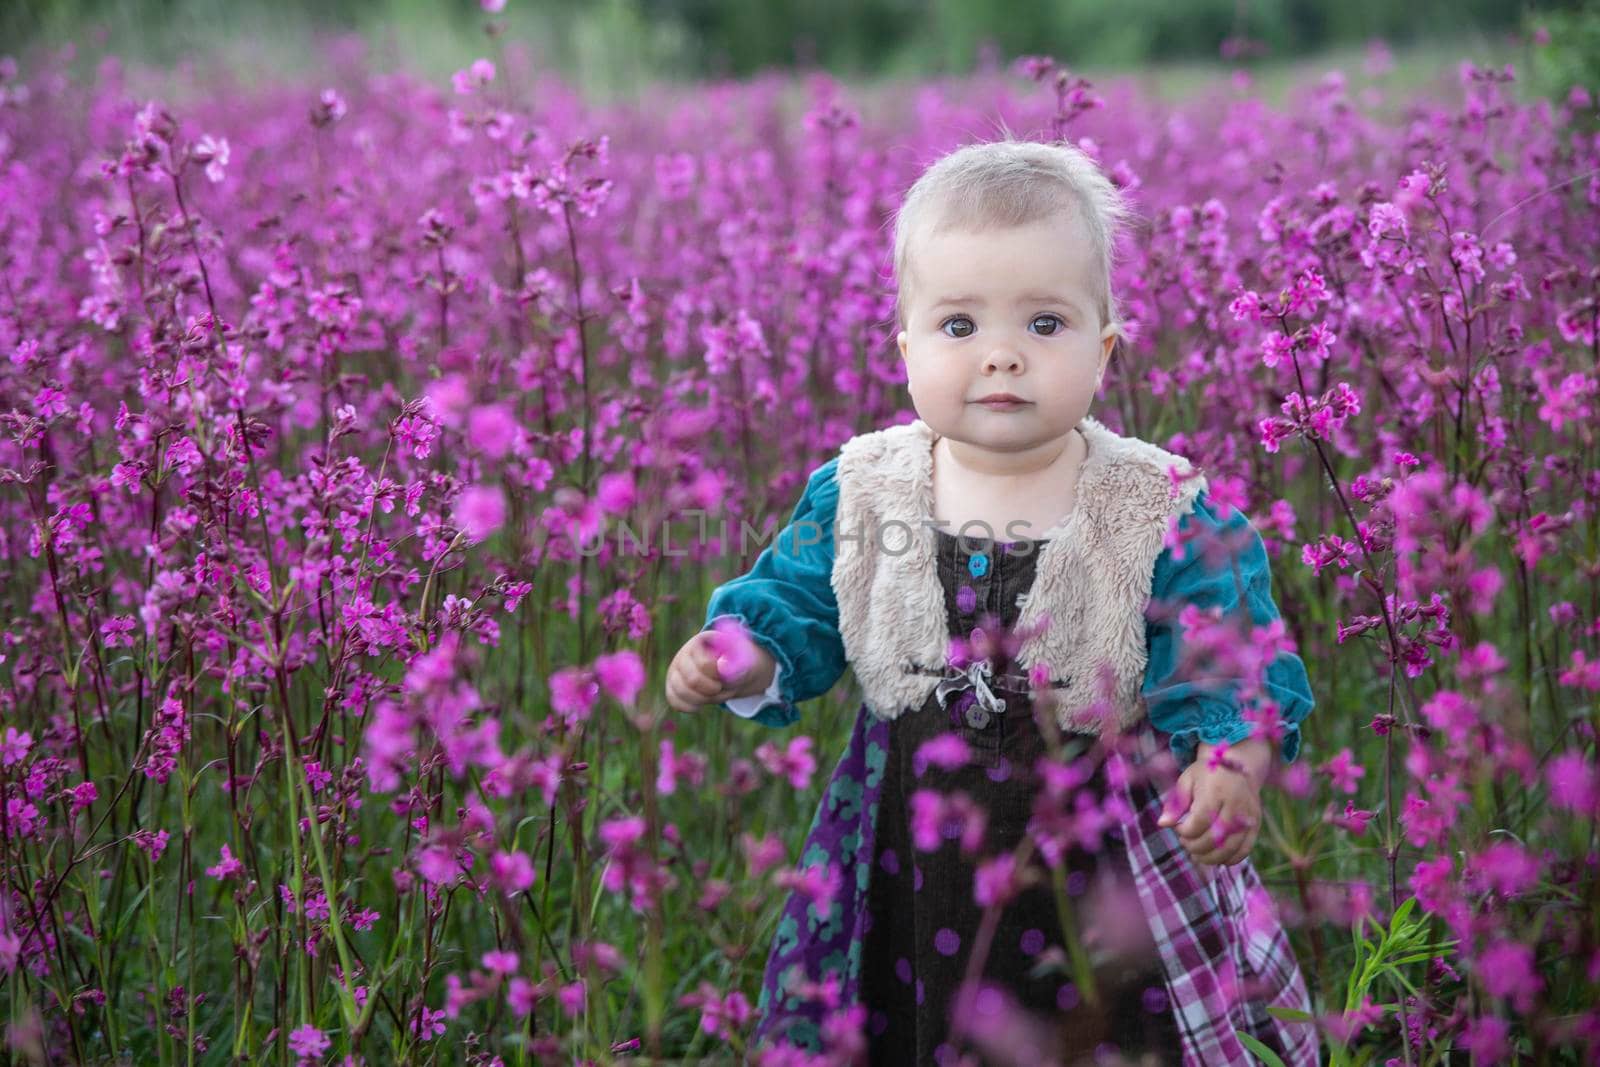 blond baby in a colored dress standing in a field with purple flowers